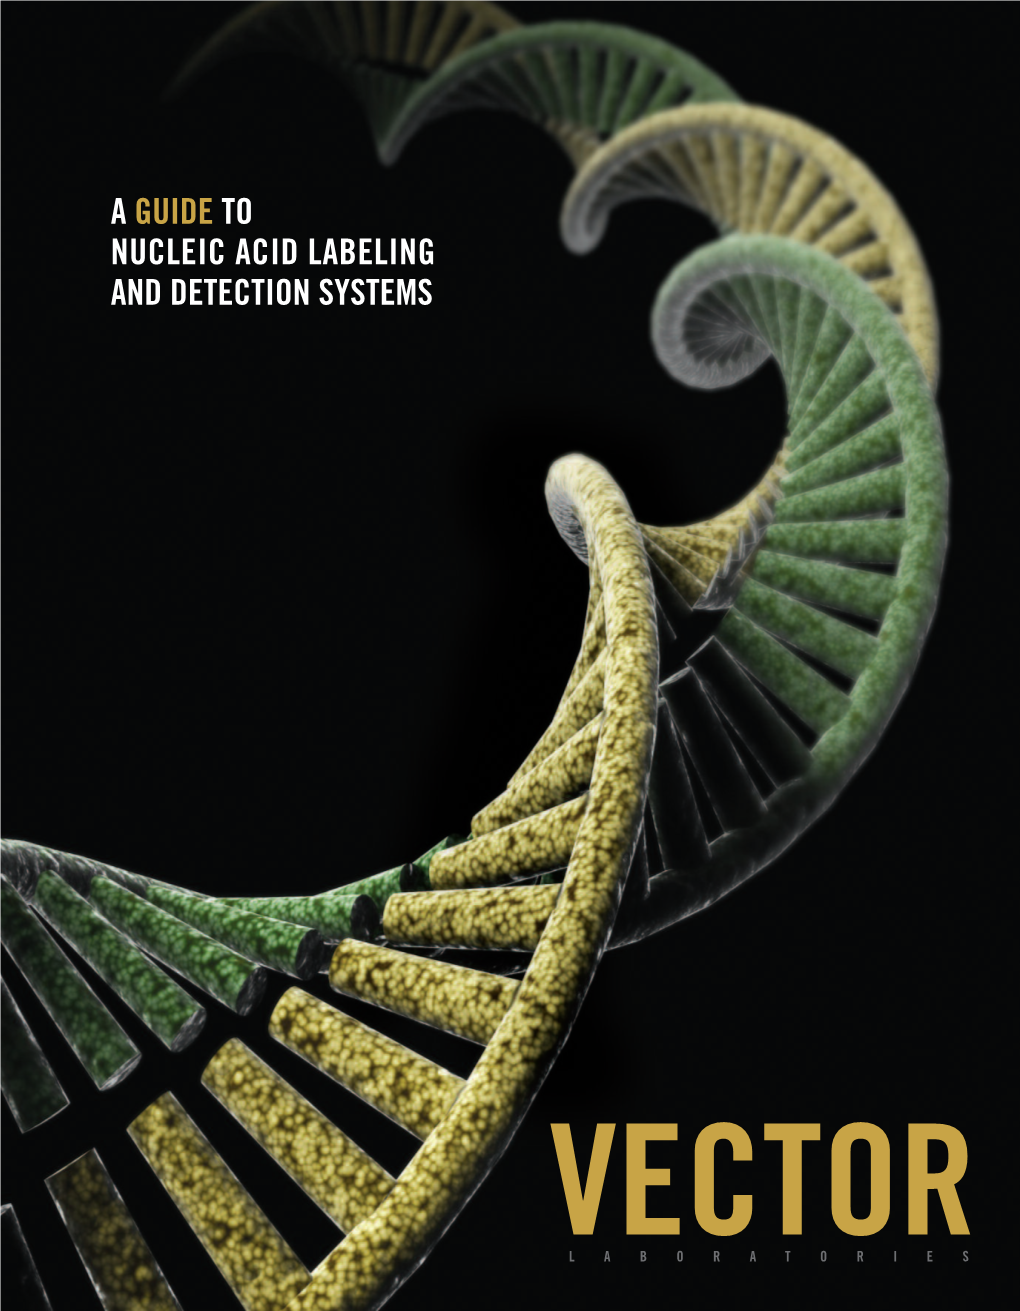 A Guide to Nucleic Acid Labeling and Detection Systems